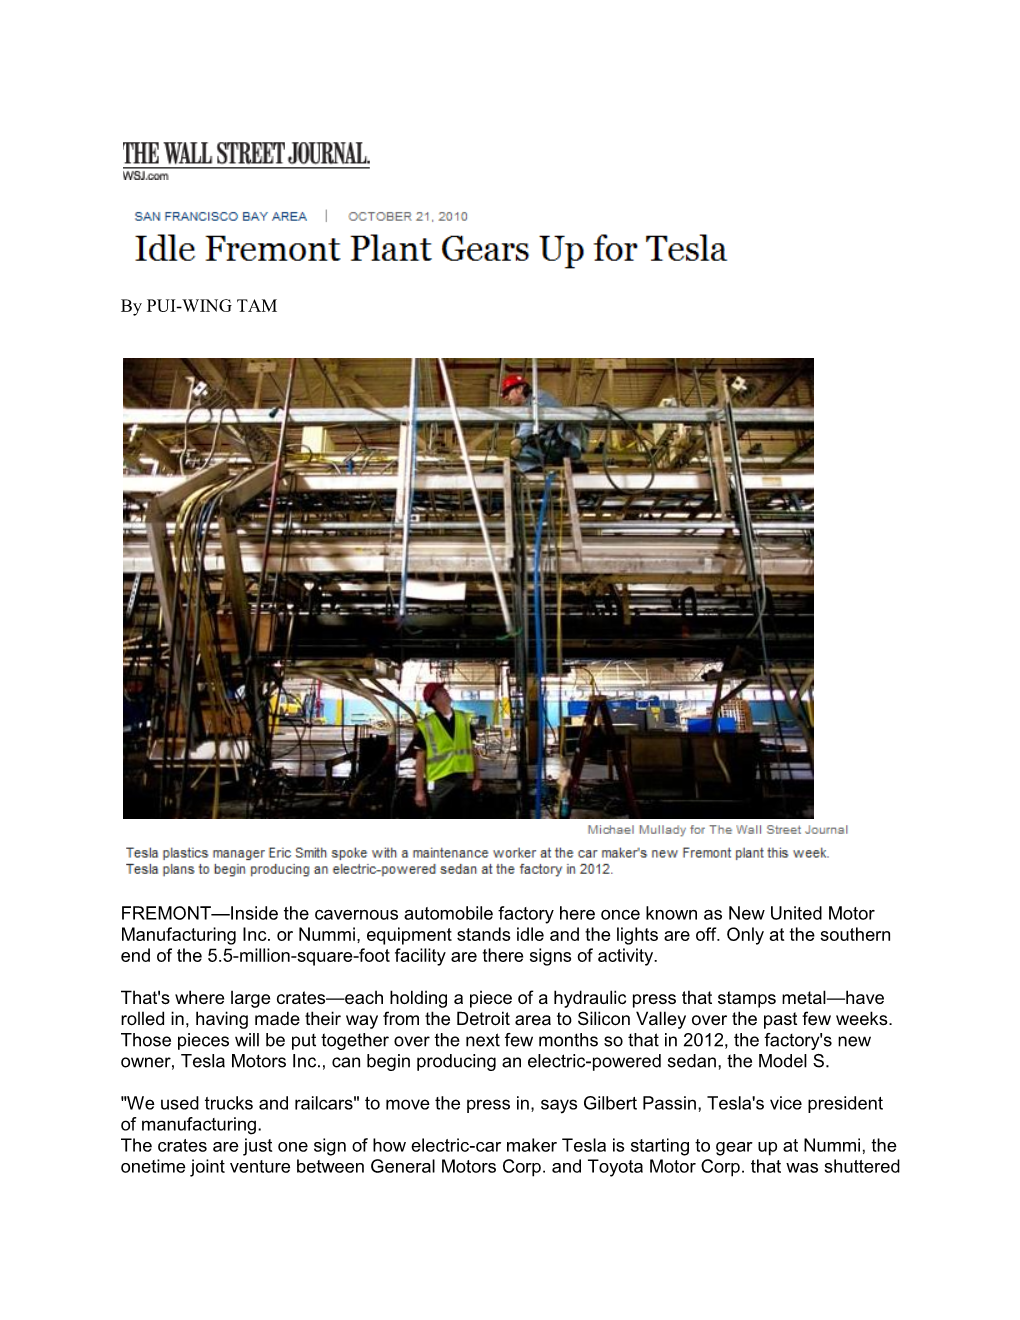 Idle Fremont Plant Gears up for Tesla